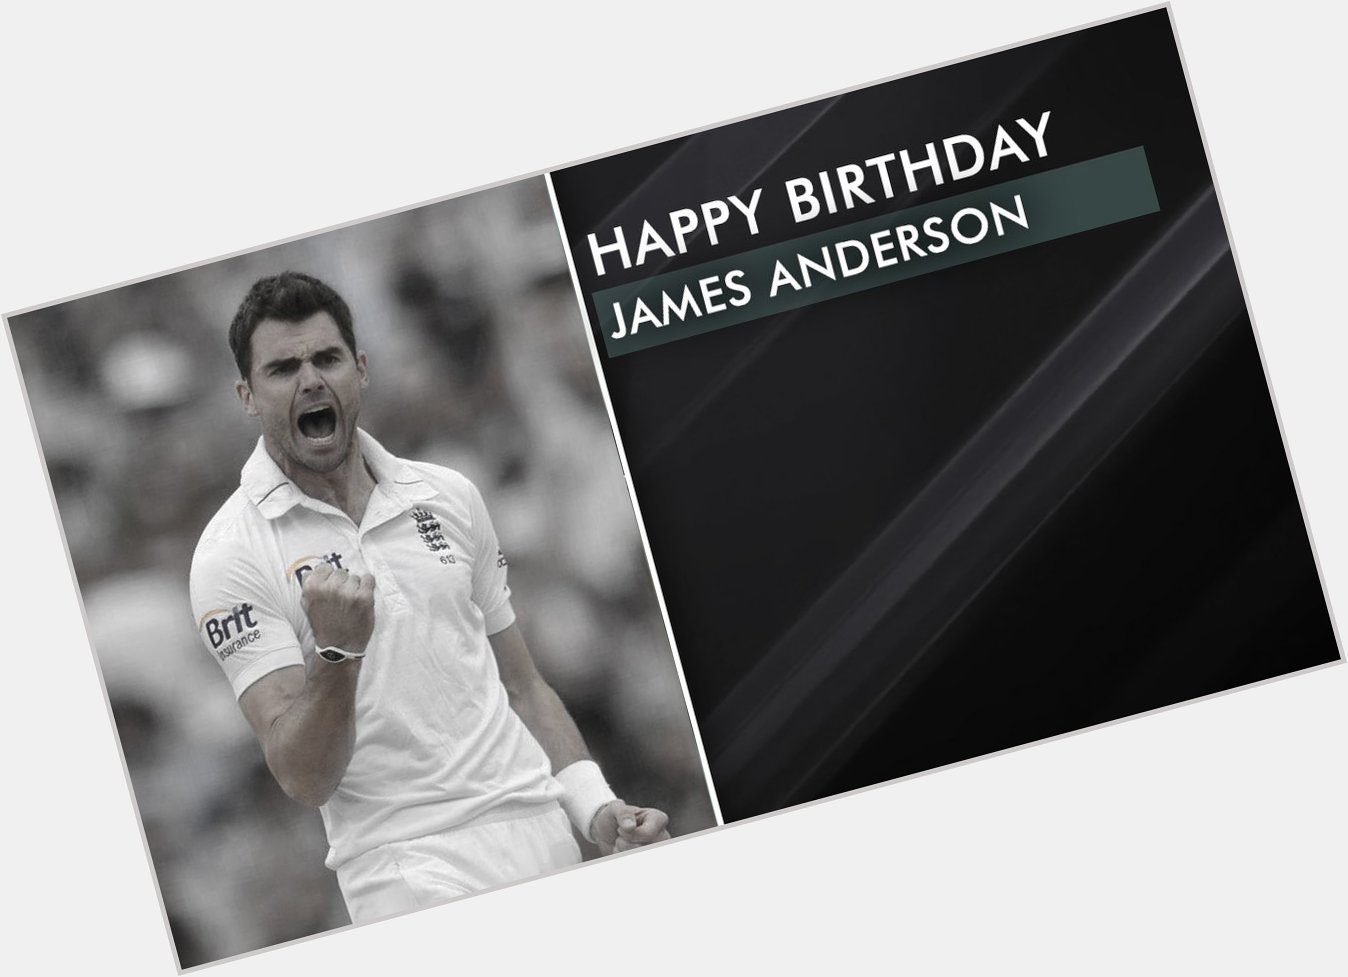 Happy Birthday!! James Anderson

The first England bowler to 4 0 0 Test wickets 